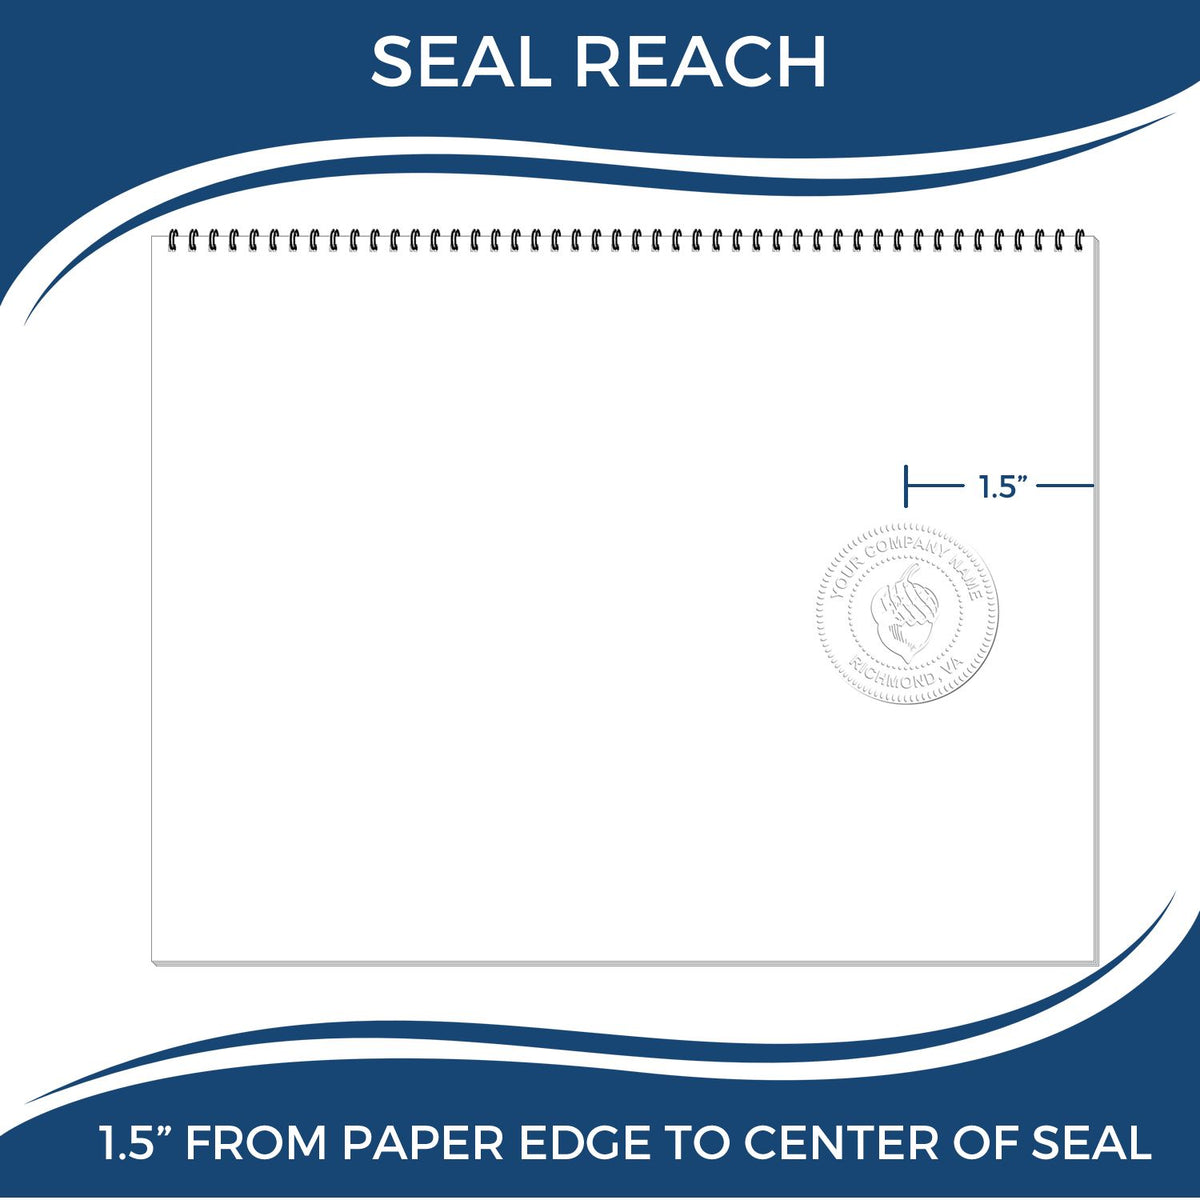 An infographic showing the seal reach which is represented by a ruler and a miniature seal image of the Gift Oklahoma Land Surveyor Seal